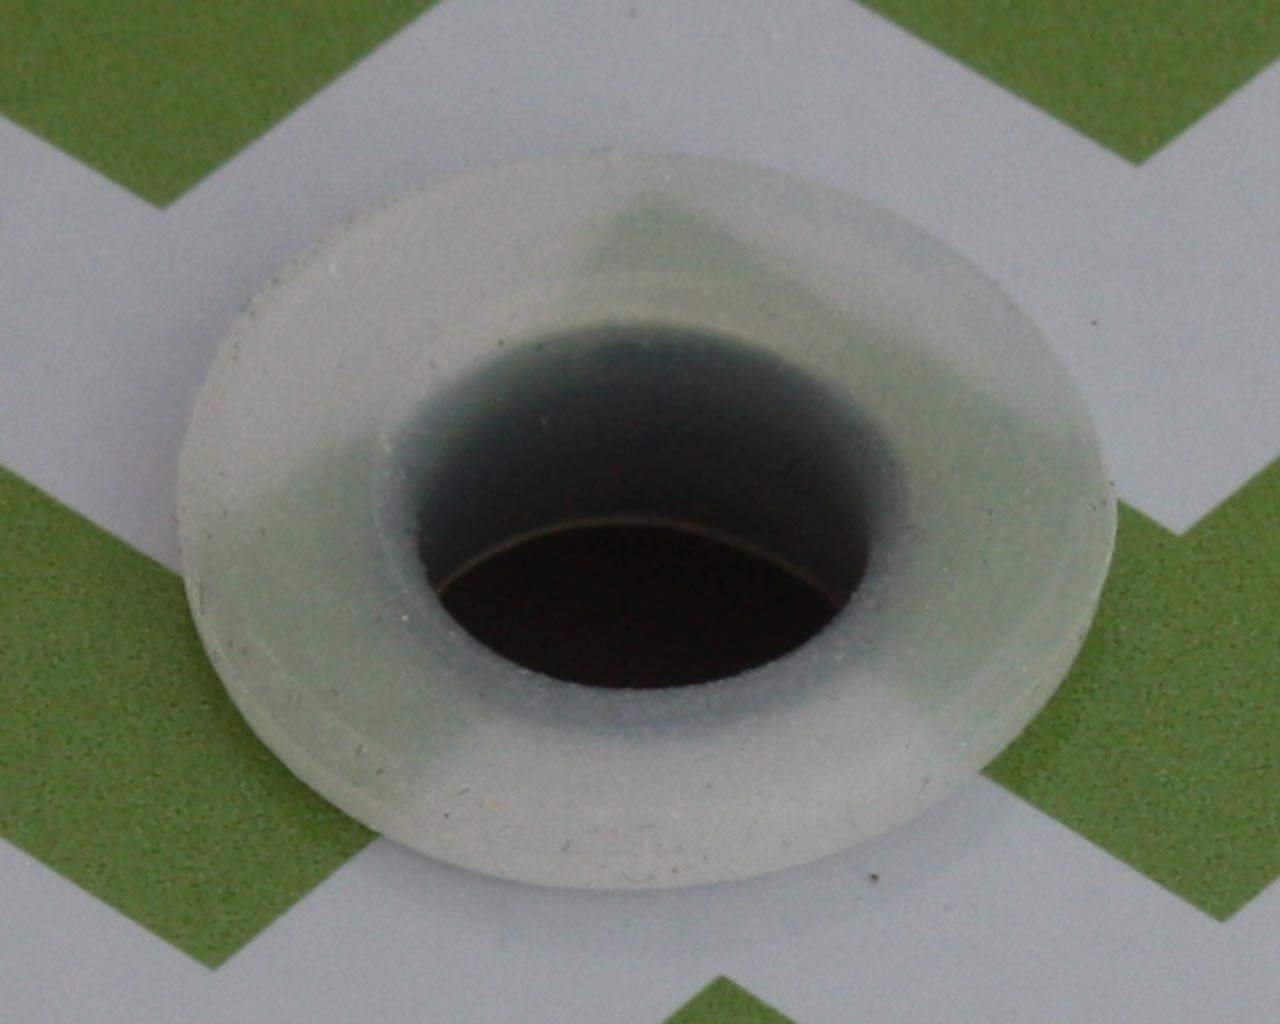 Silicone straw hole grommet gasket for Mason jar lids. Reduces 10mm hole to 8mm.